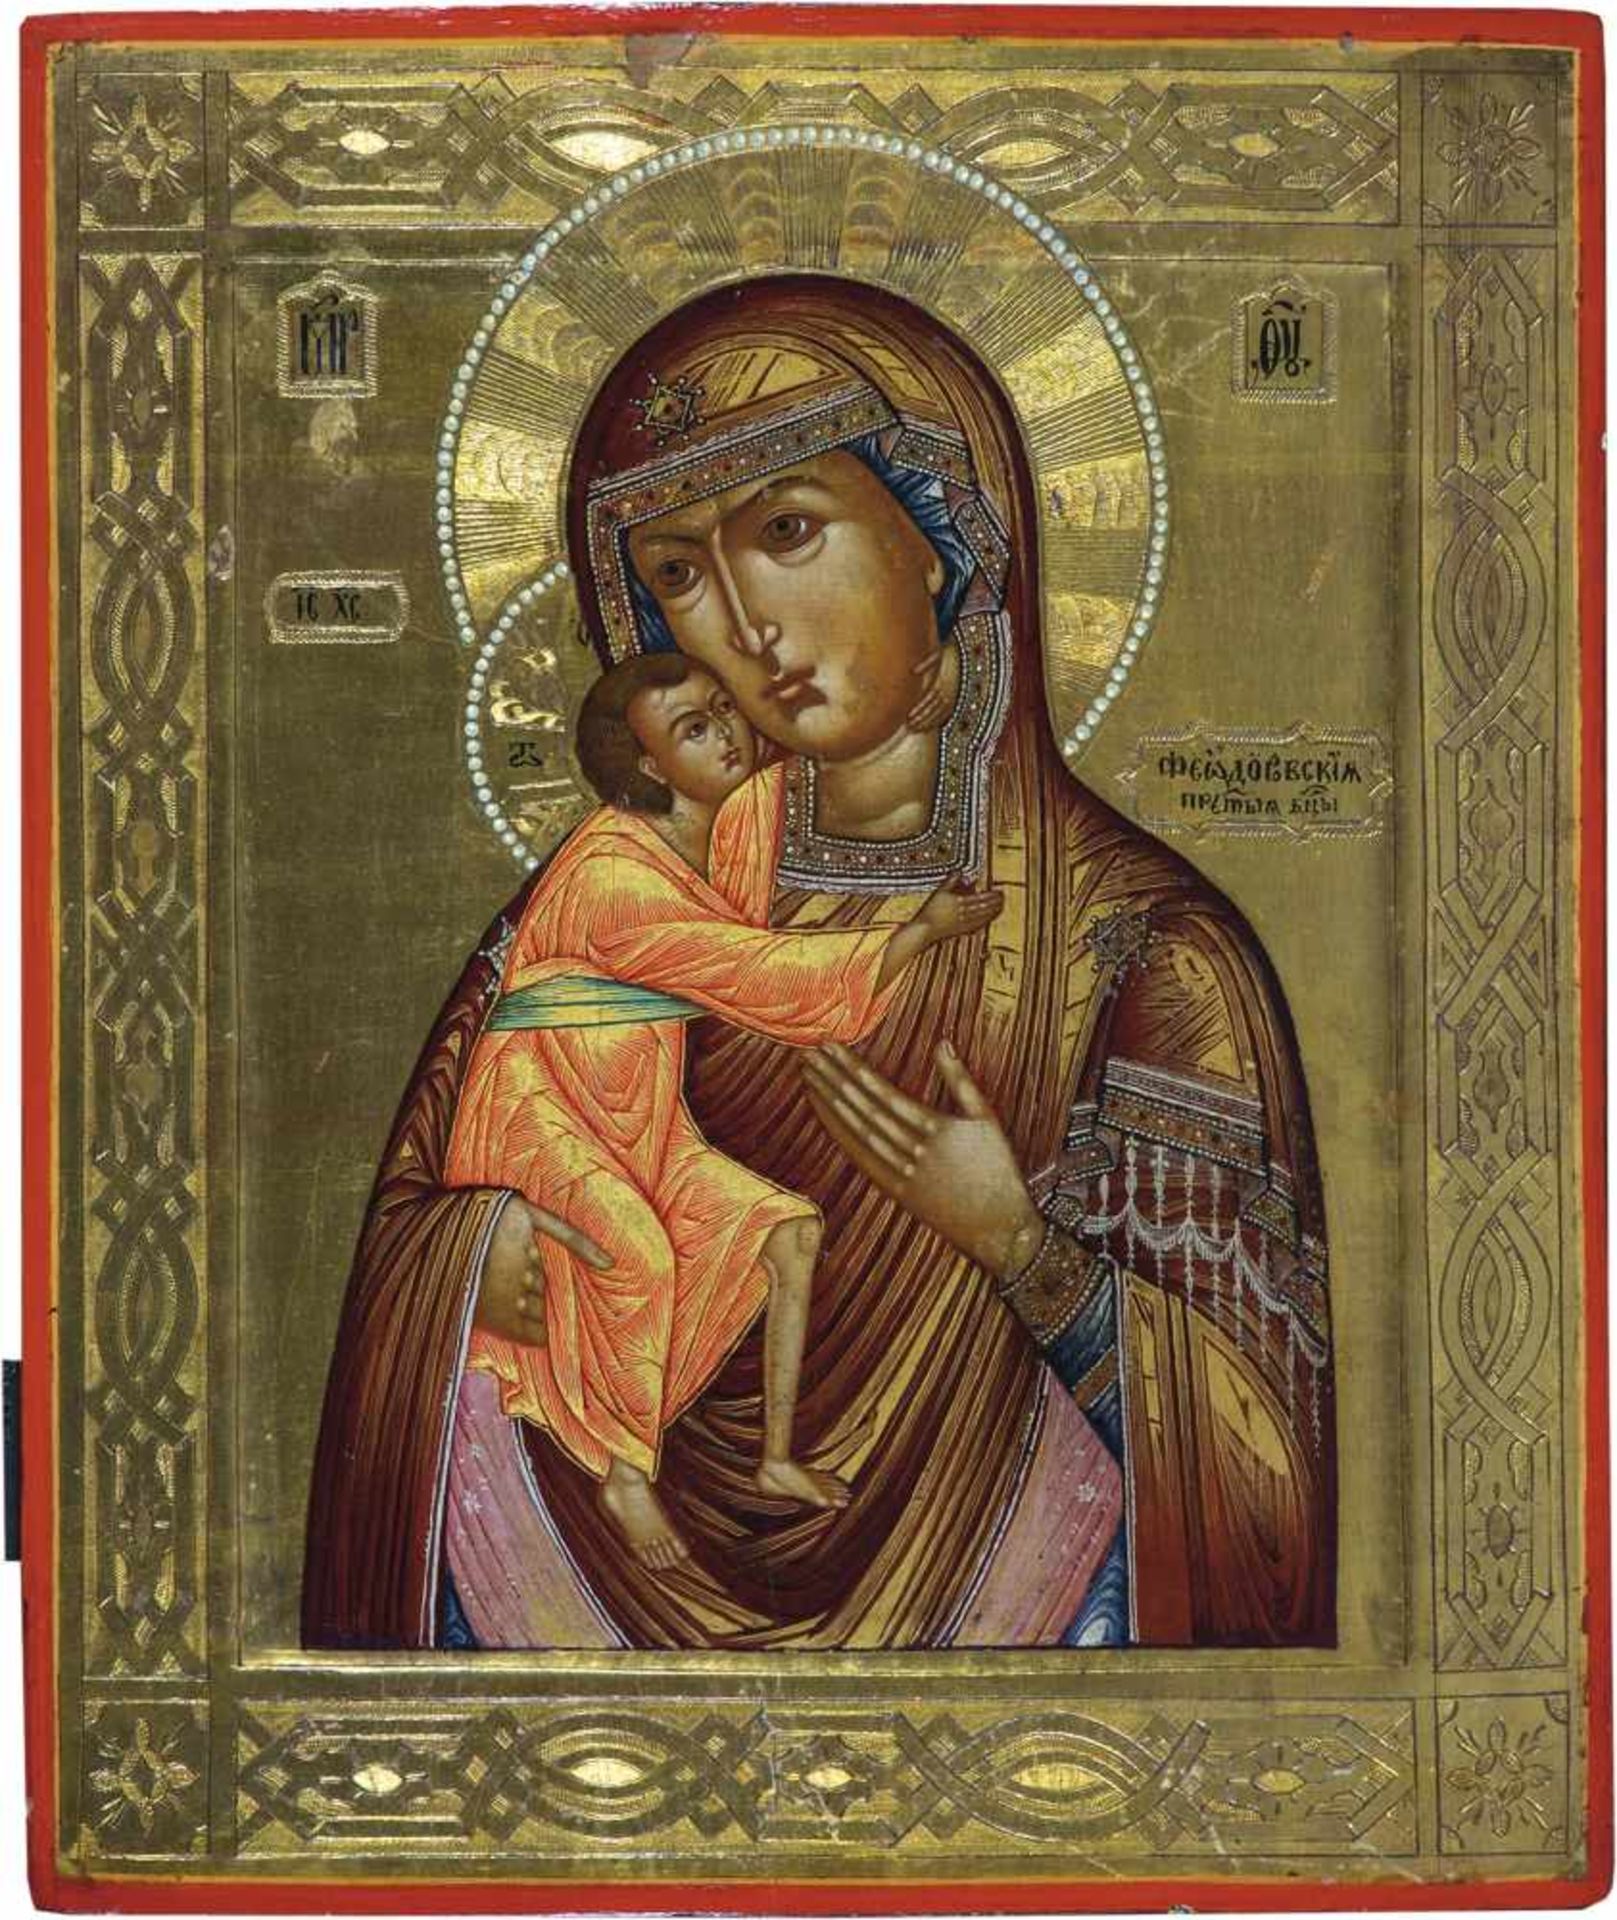 A finely painted icon showing the Feodorowskaya Mother of God. Russia, late 19th century.Tempera